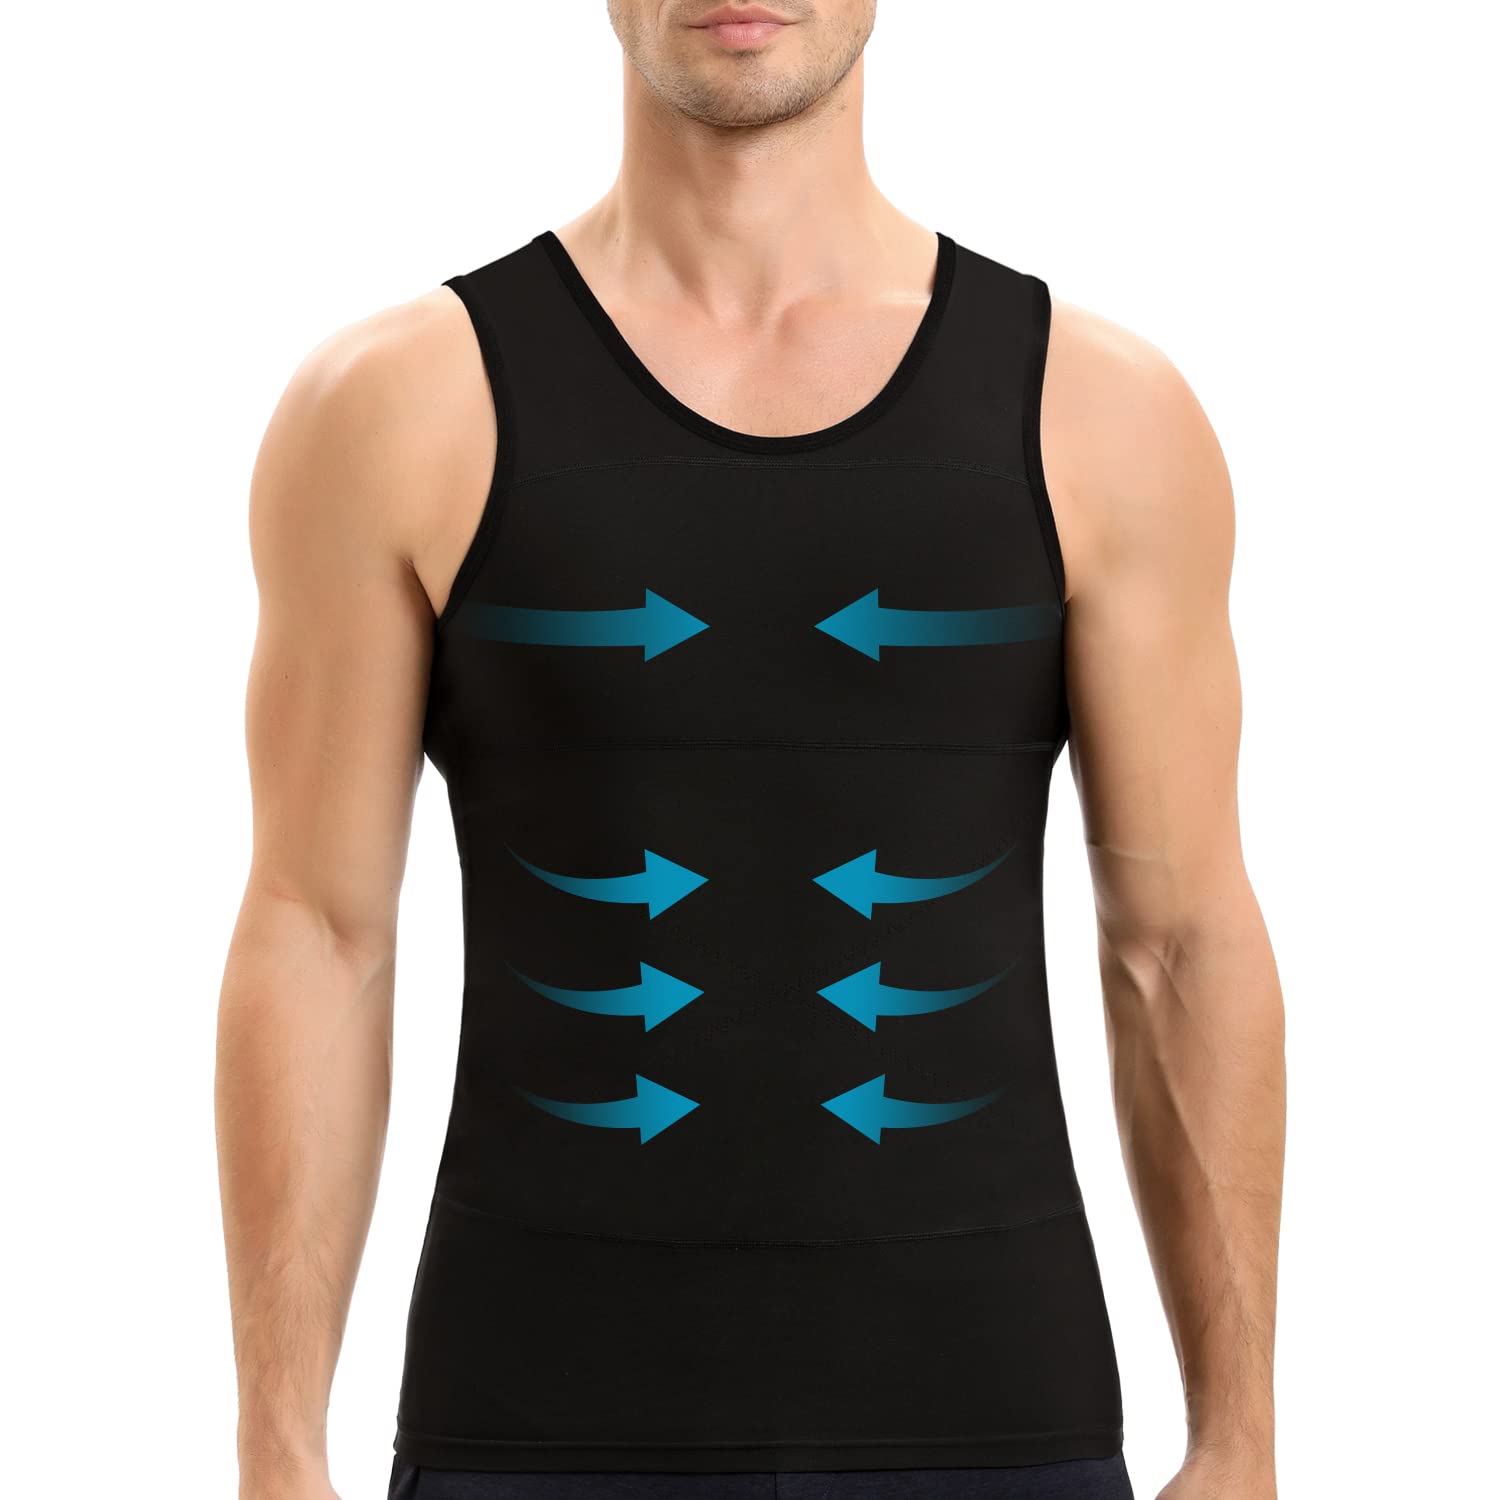 A++ Slimming Tank Top Mens Elastic, Tight, And Slimming Sports